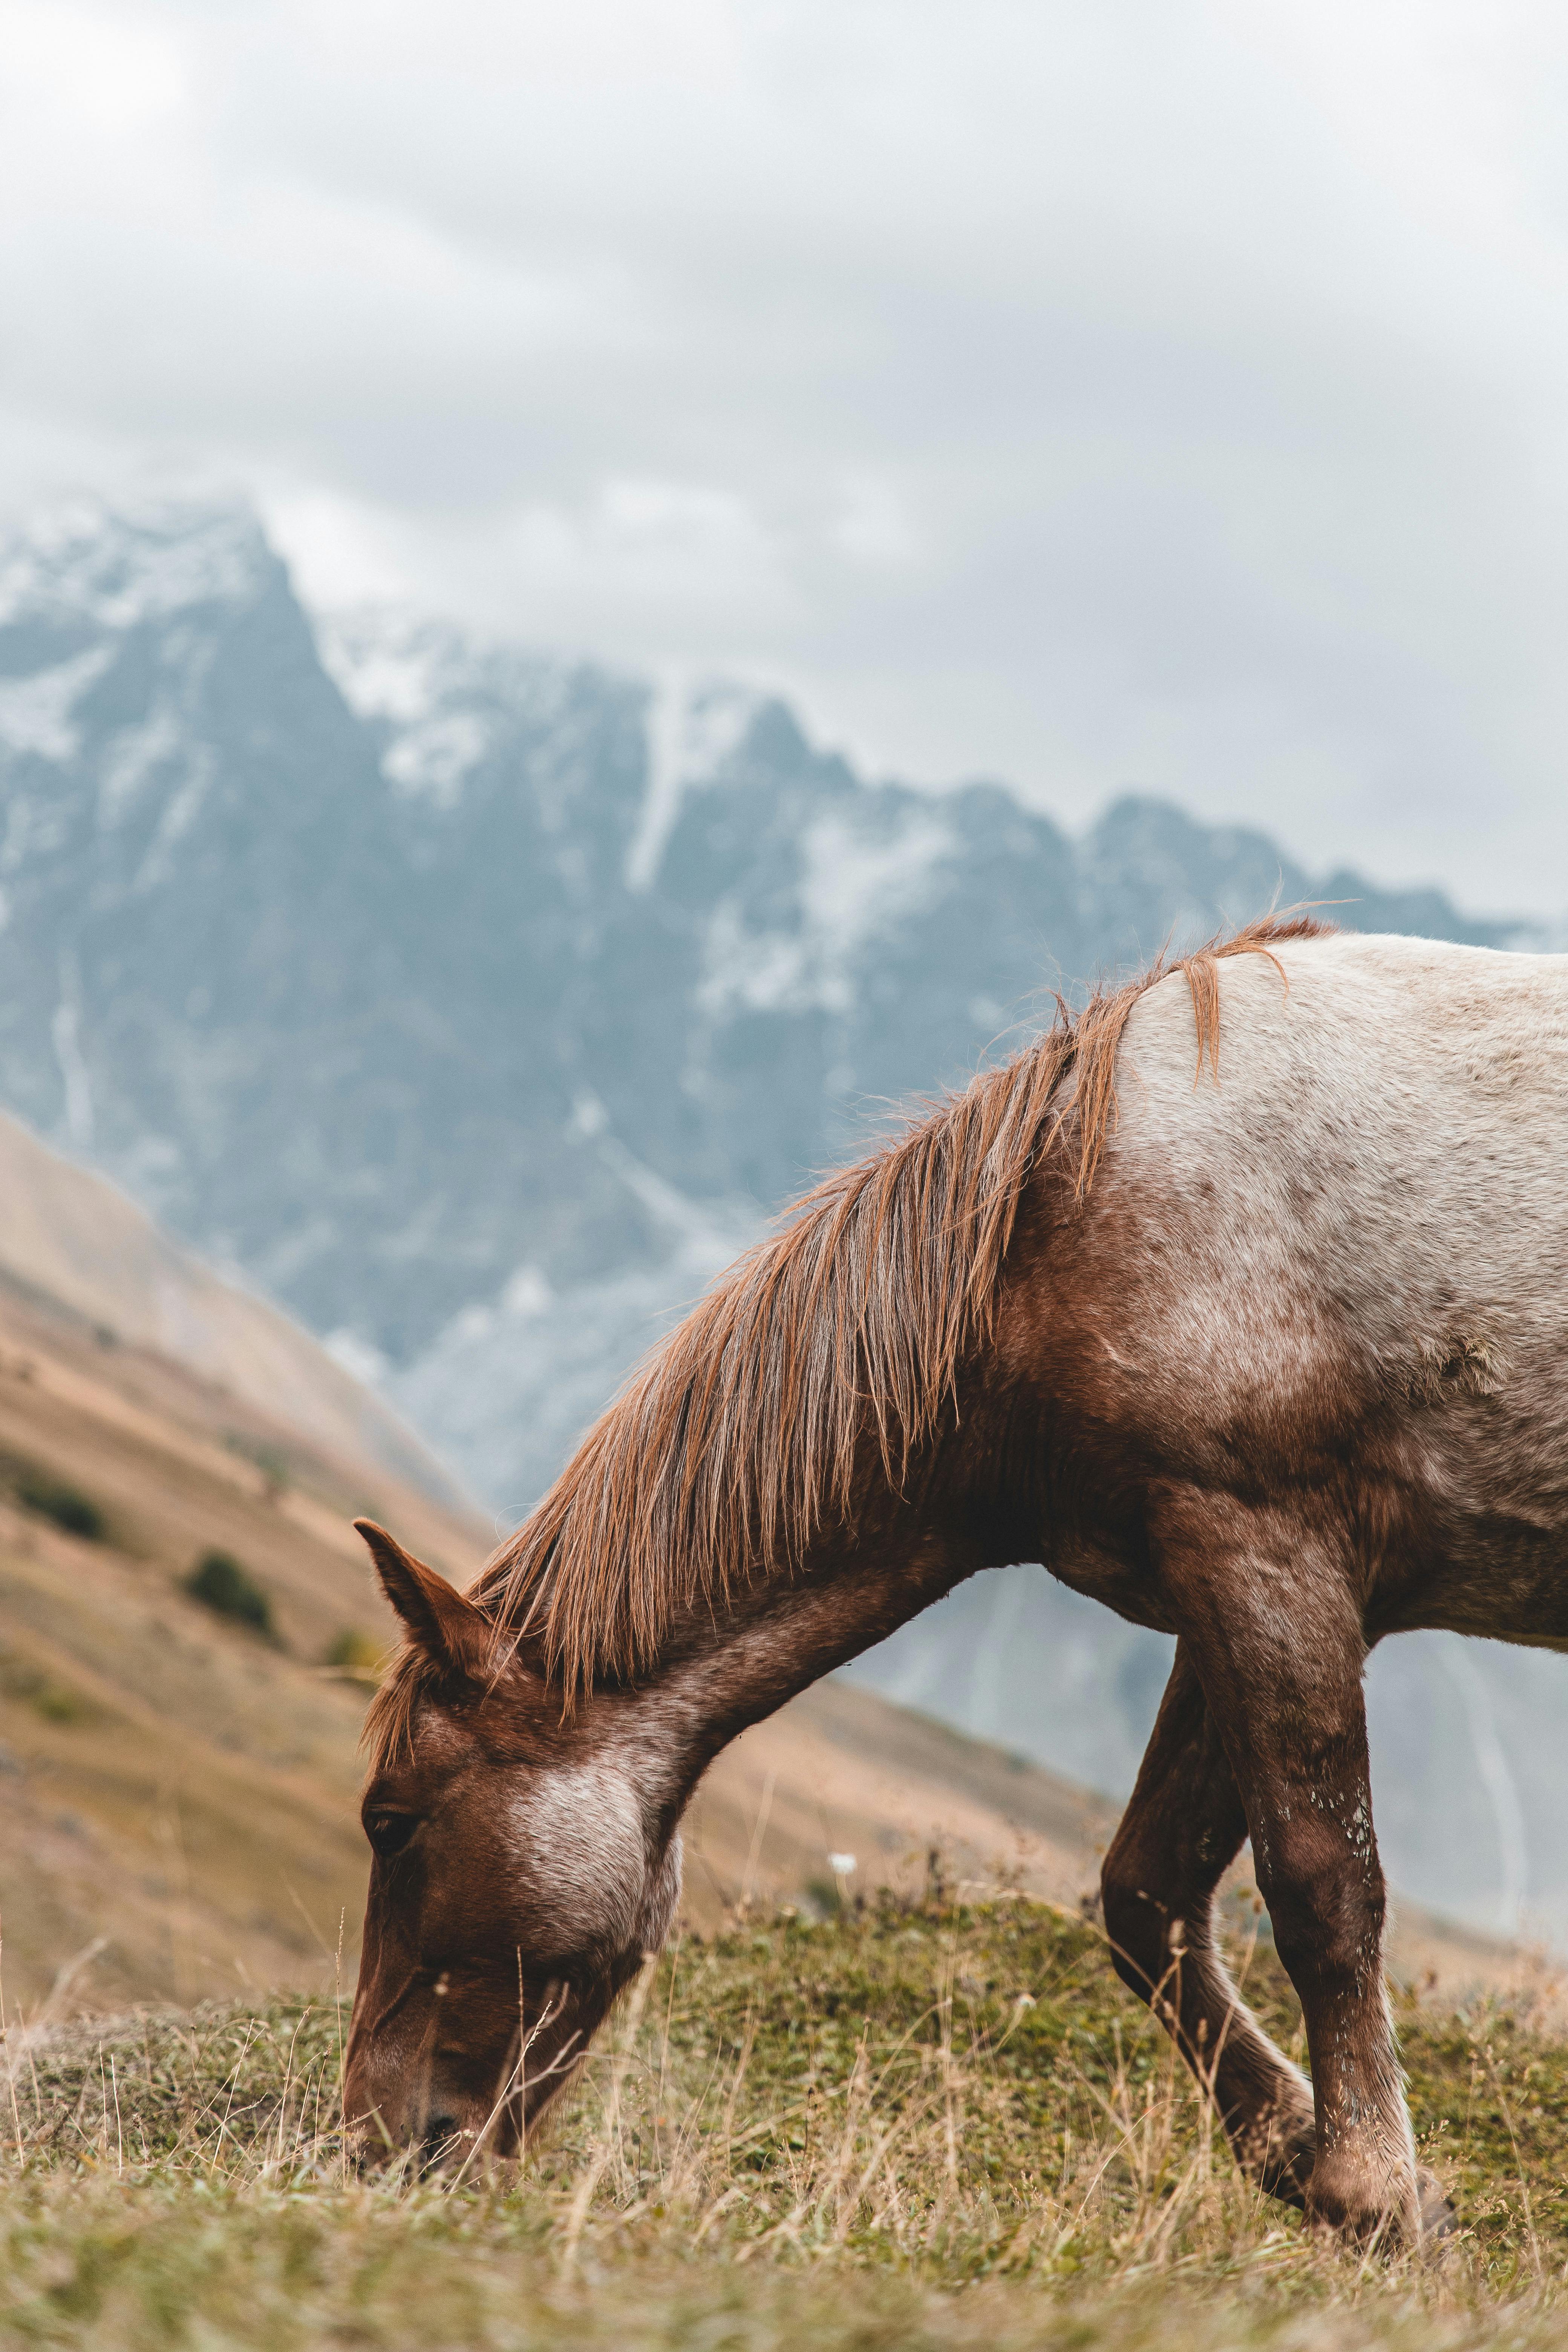 WallpapersWidecom  Horses Ultra HD Wallpapers for UHD Widescreen  UltraWide  Multi Display Desktop Tablet  Smartphone  Page 1